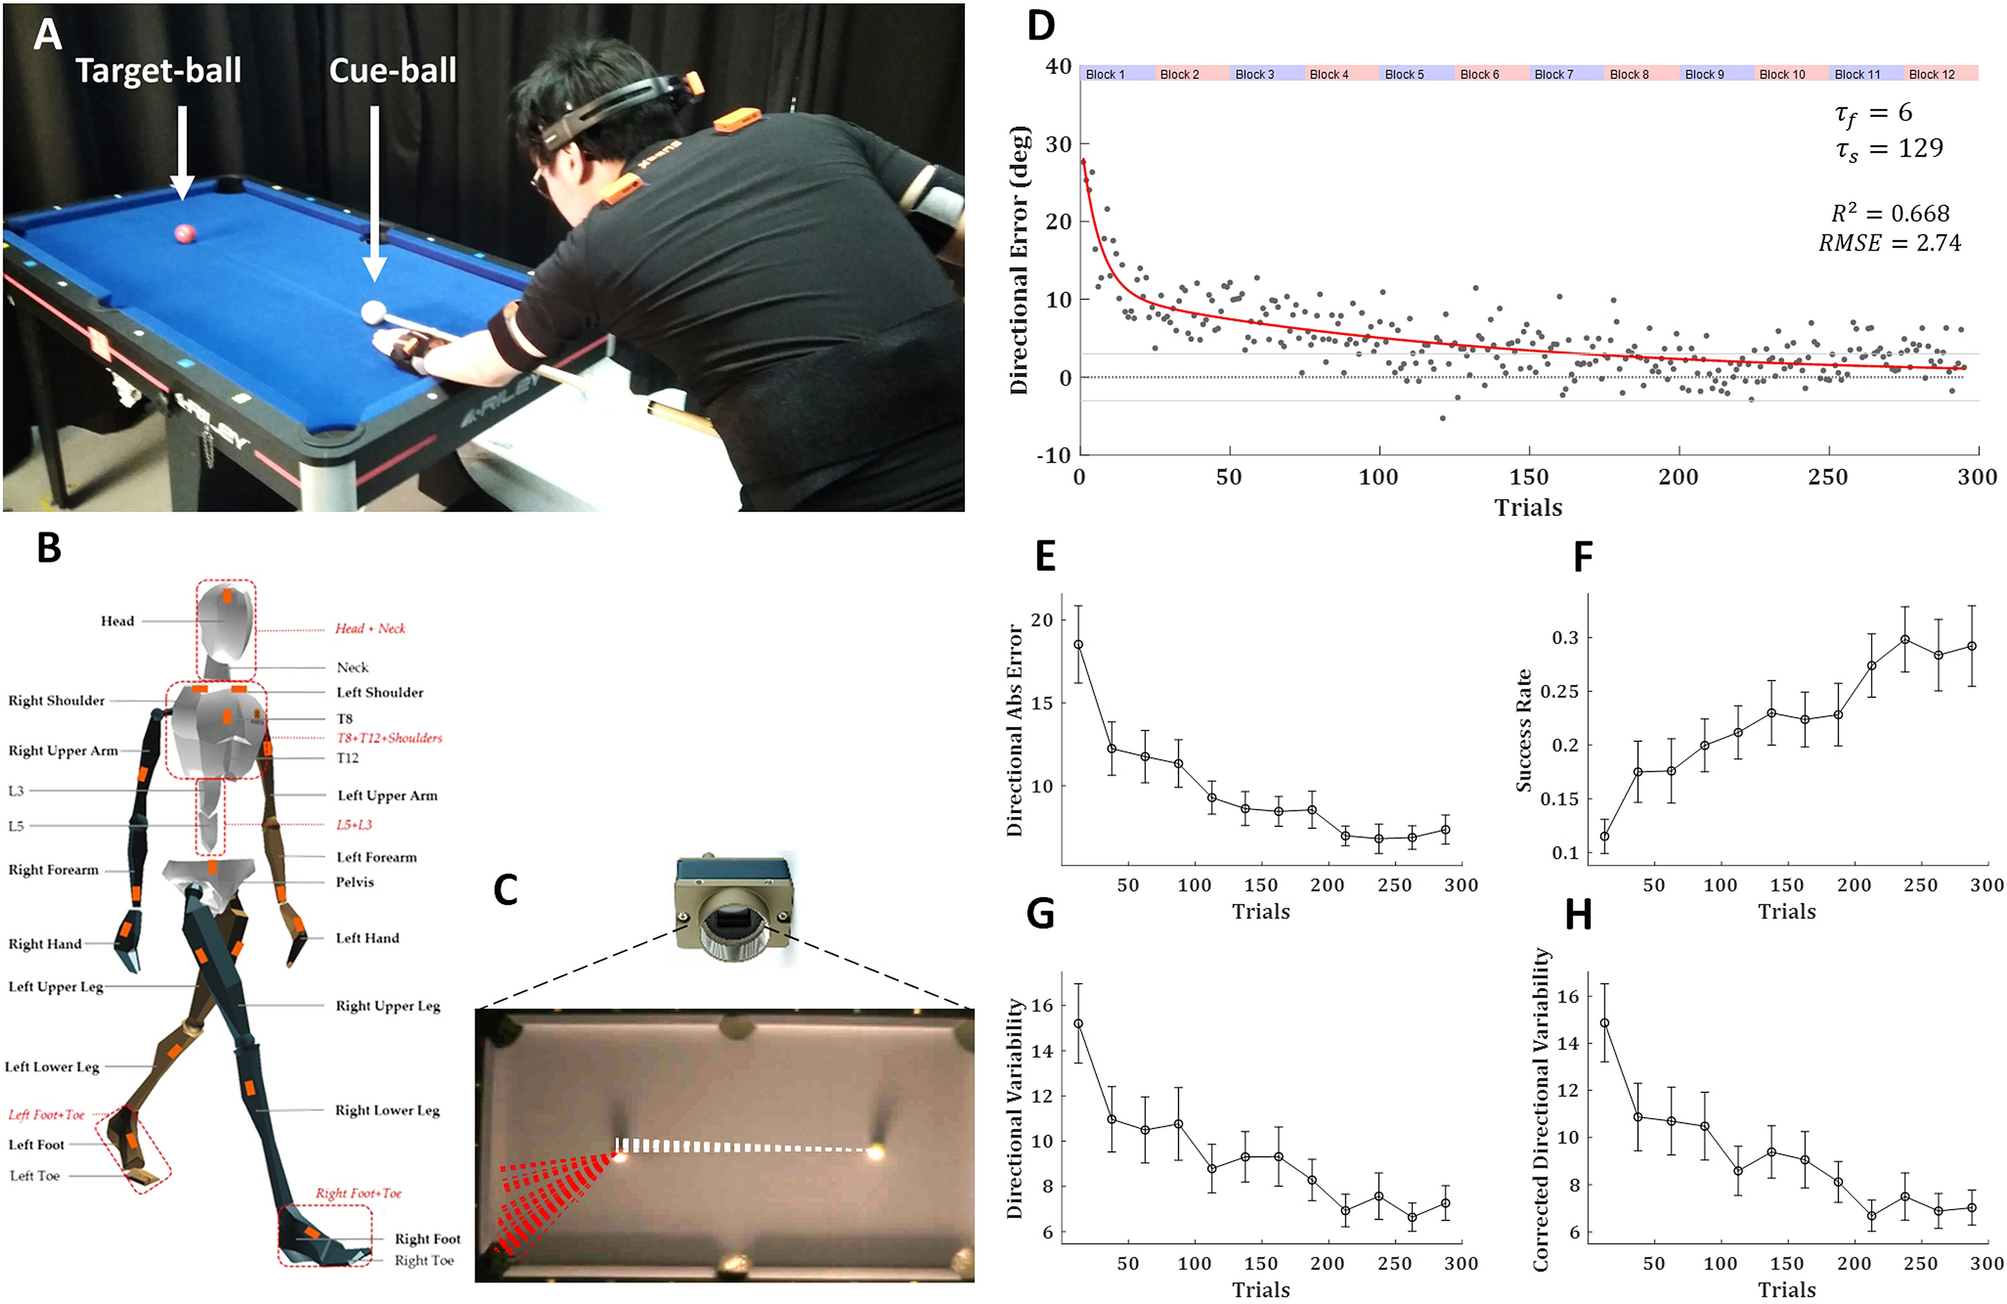 Motor learning in real-world pool billiards | Scientific Reports